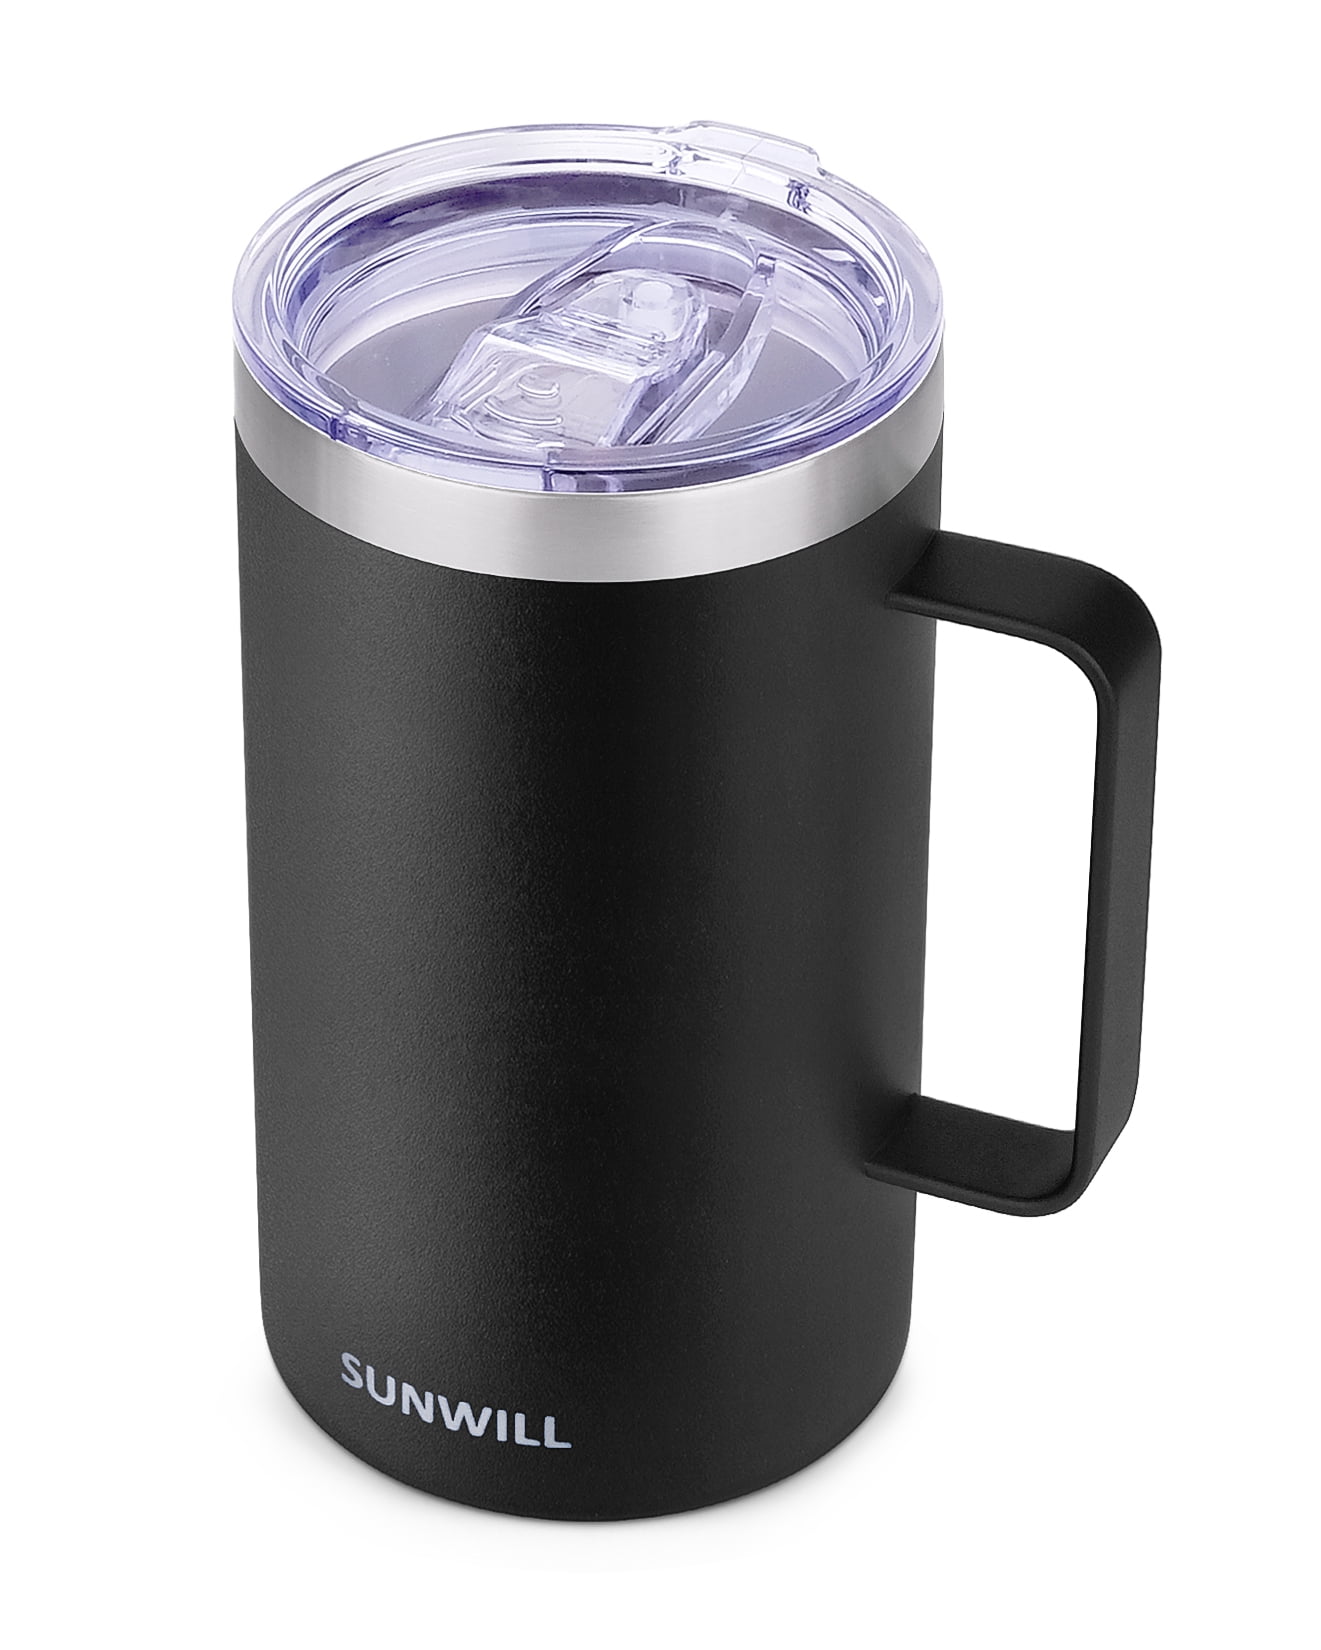 Travel　Insulated　SUNWILL　Coffee　Steel　Stainless　Mug,　Cup　22oz,　with　Lid,　Navy